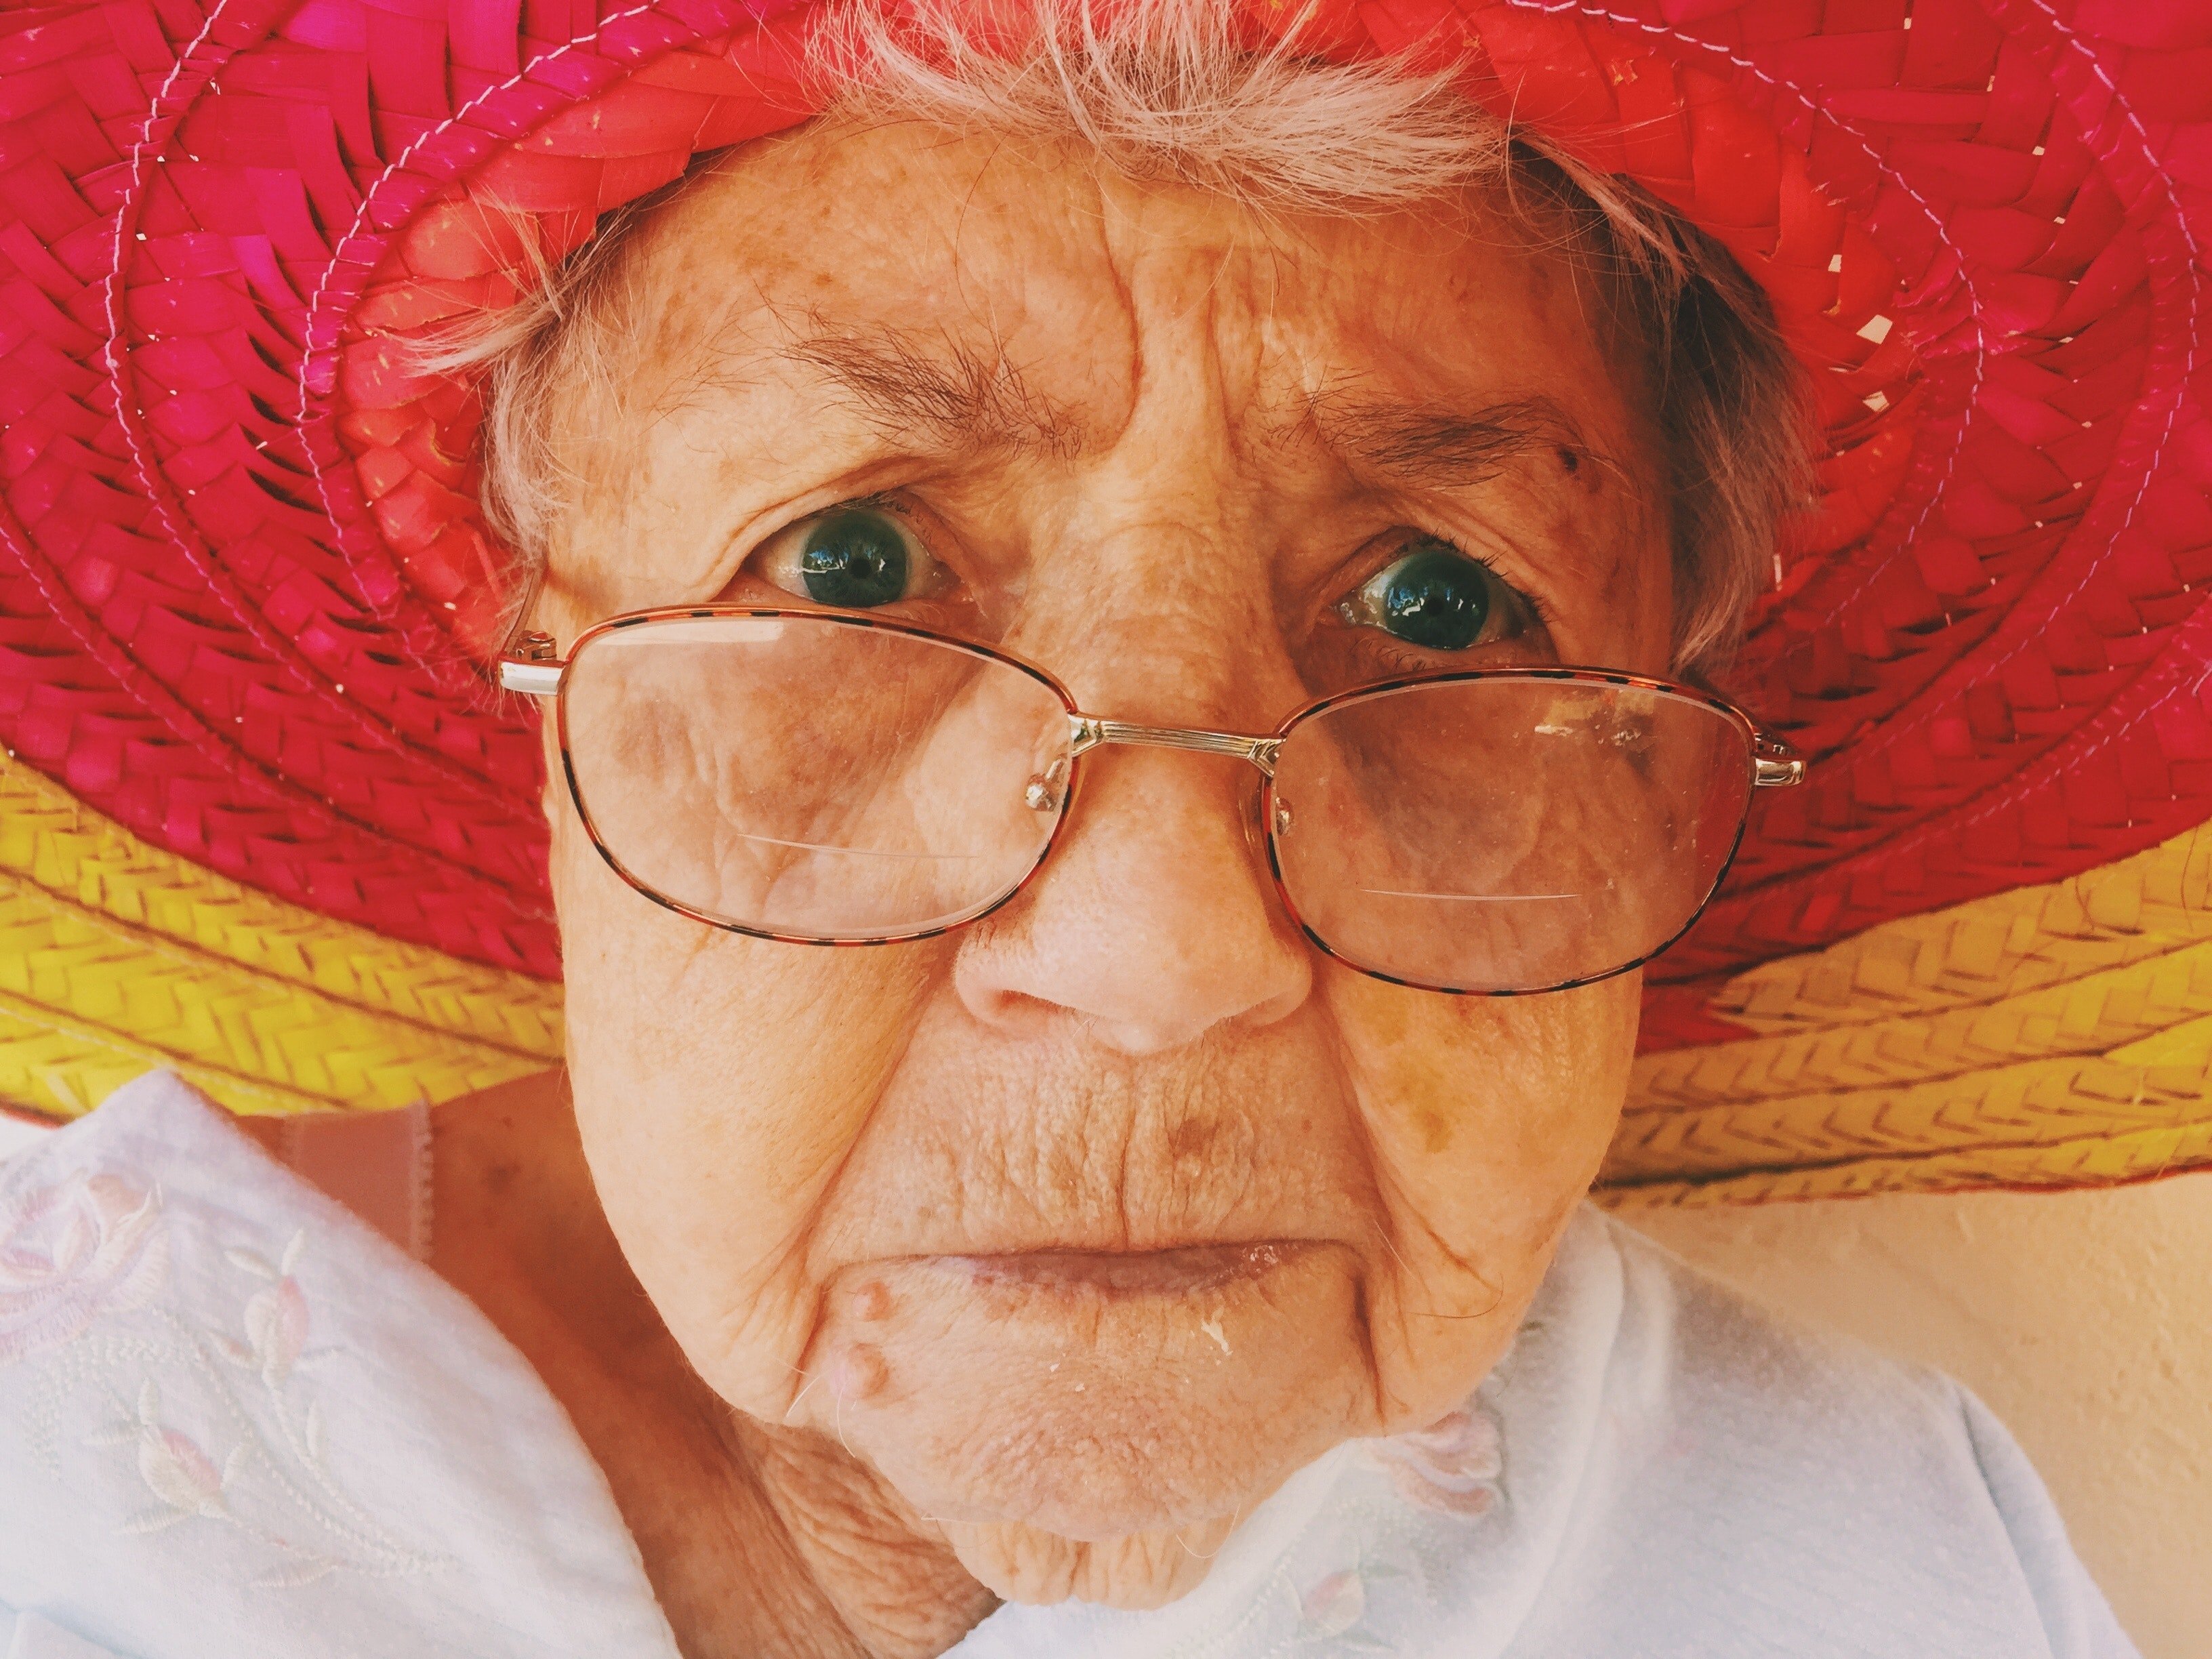 An angry grandma in a giant red hat. | Source: Pexels